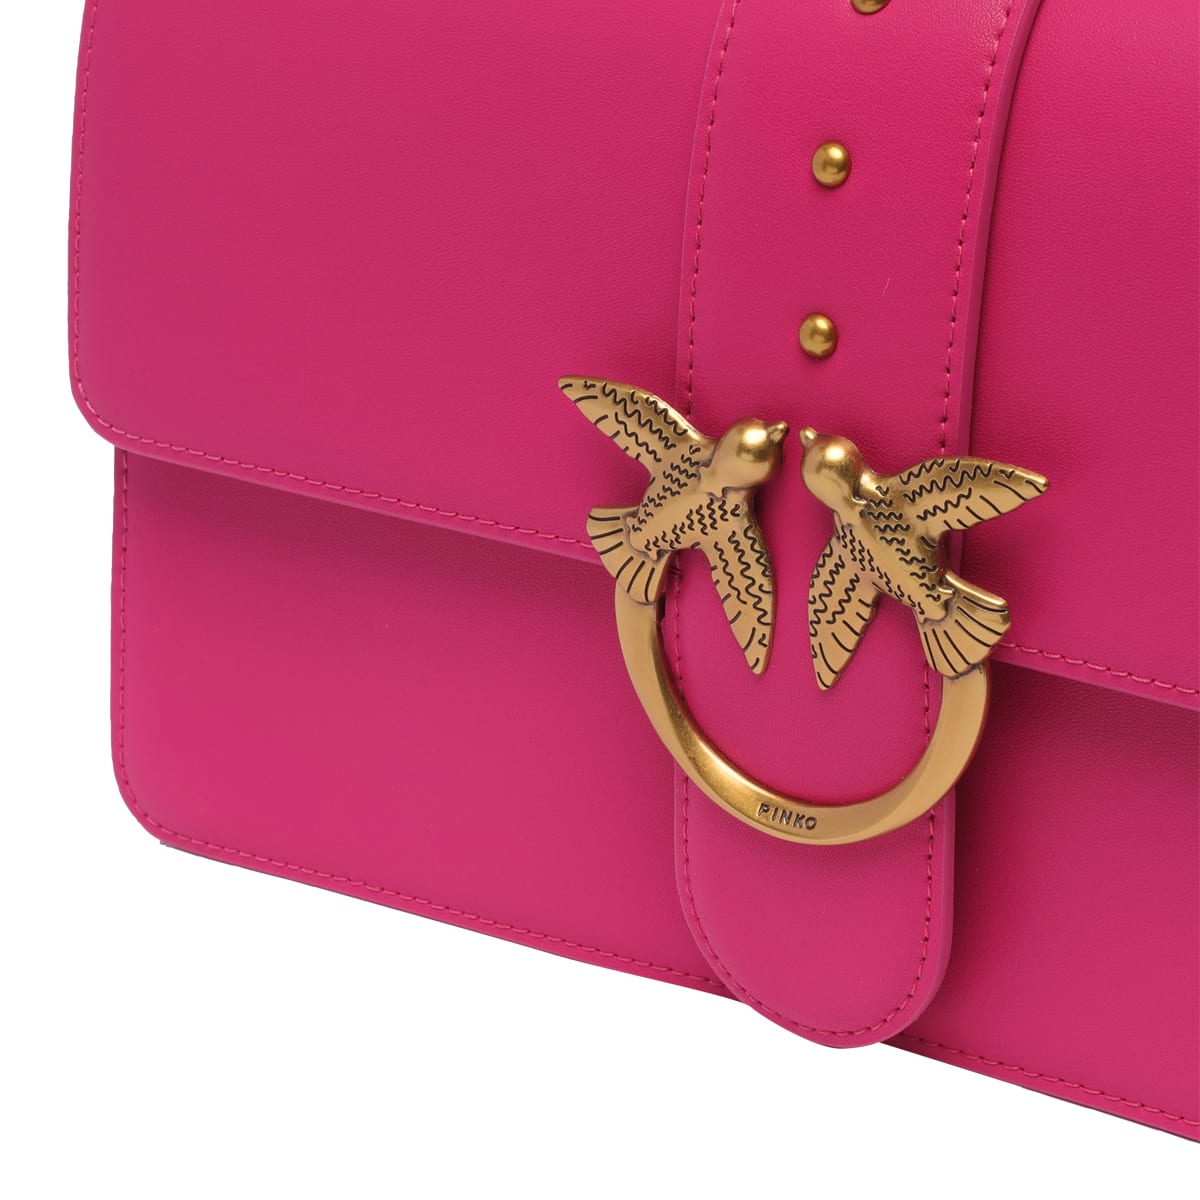 Shop Pinko Classic Love Bag One Simply In Pink